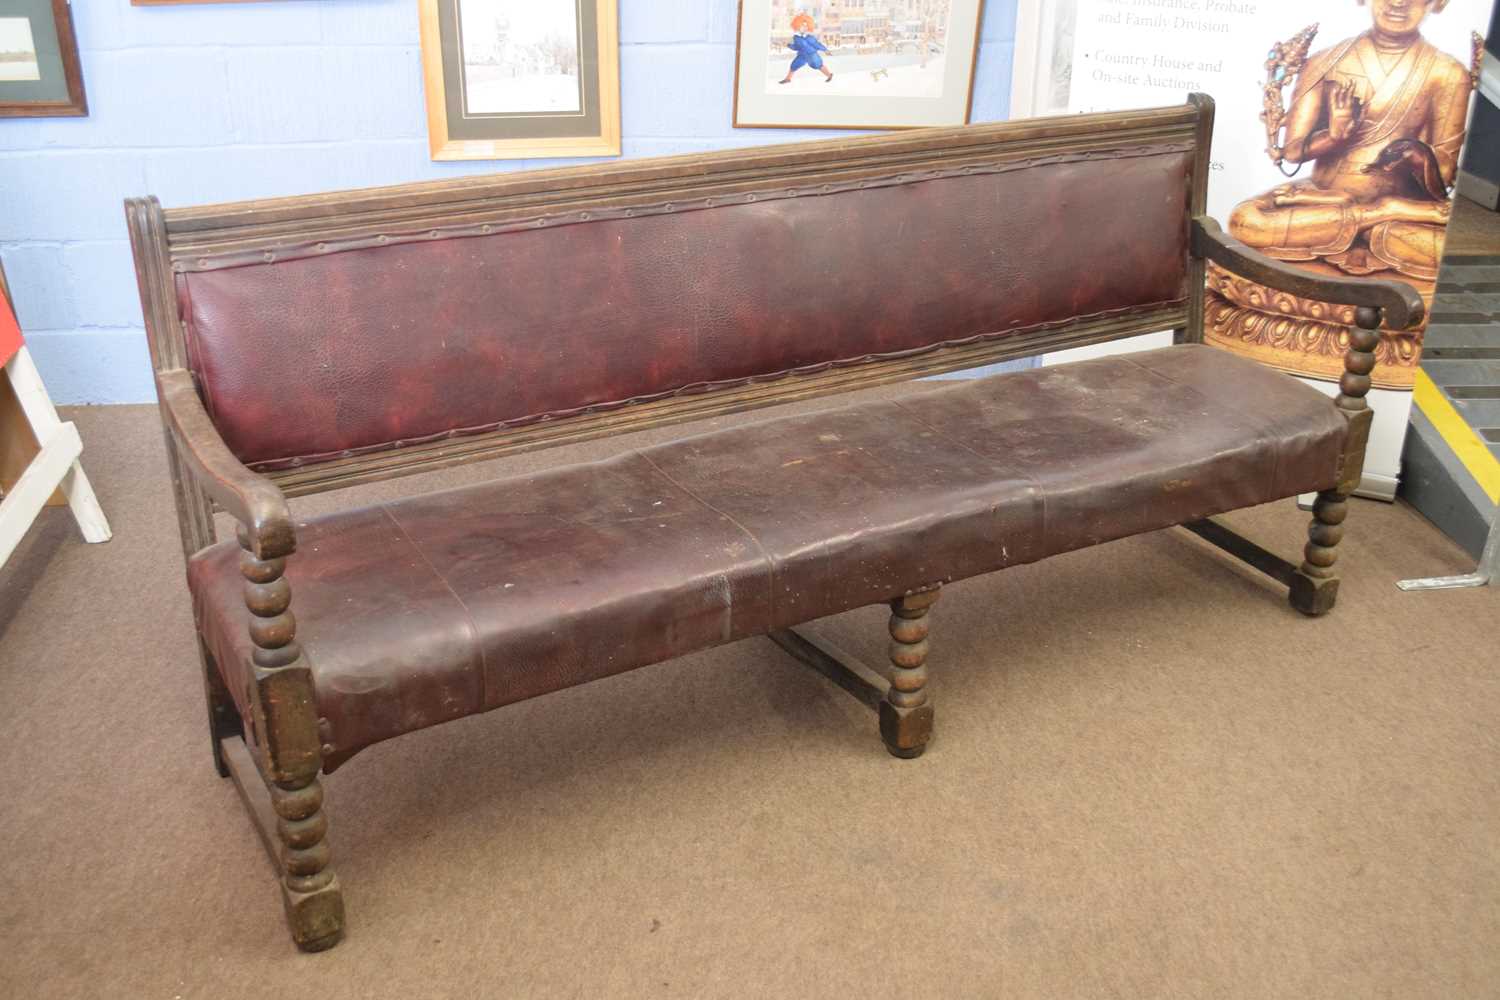 Victorian oak framed railway bench with upholstered seat and back, raised on bobbin turned legs, - Image 2 of 4